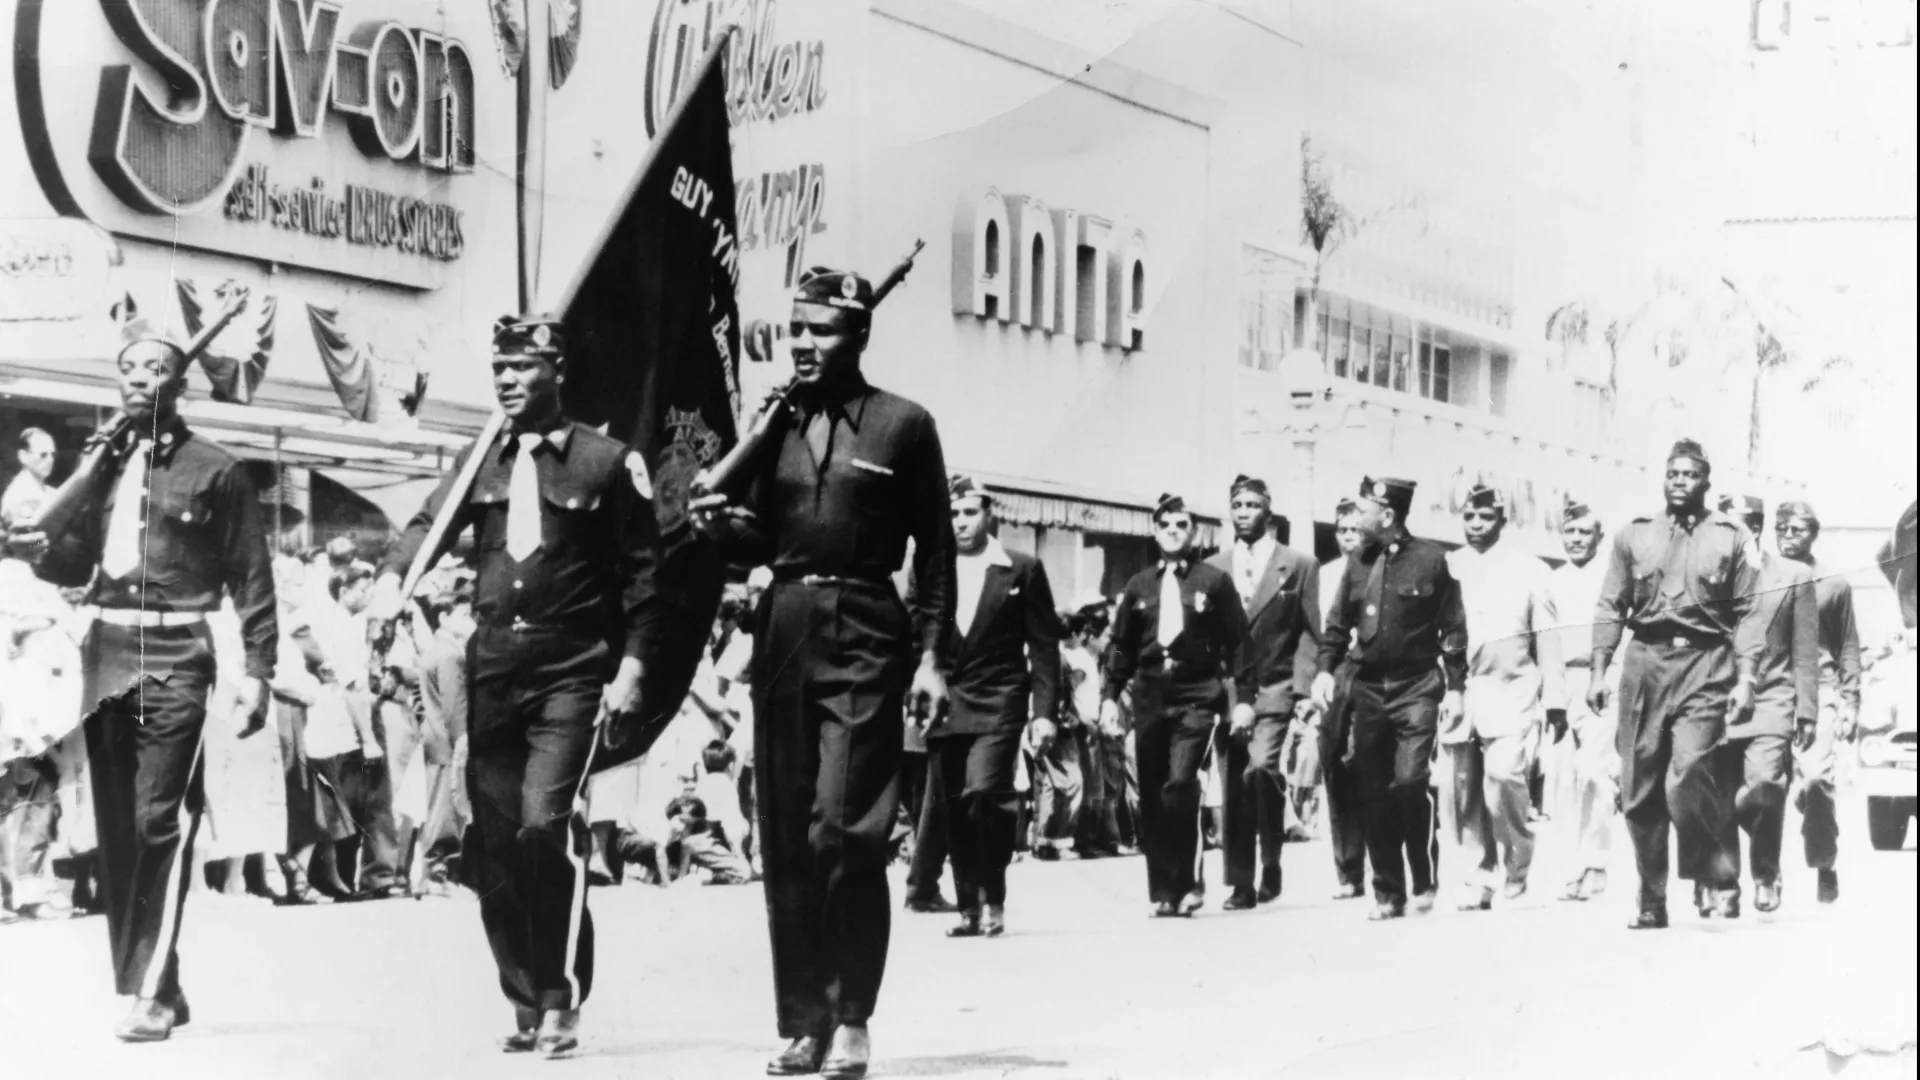 American Legion Post No. 710 Drill Team at Court & E Streets in Downtown SB. 1948. Photo by Henry Hooks, courtesy of San Bernardino County Museum.